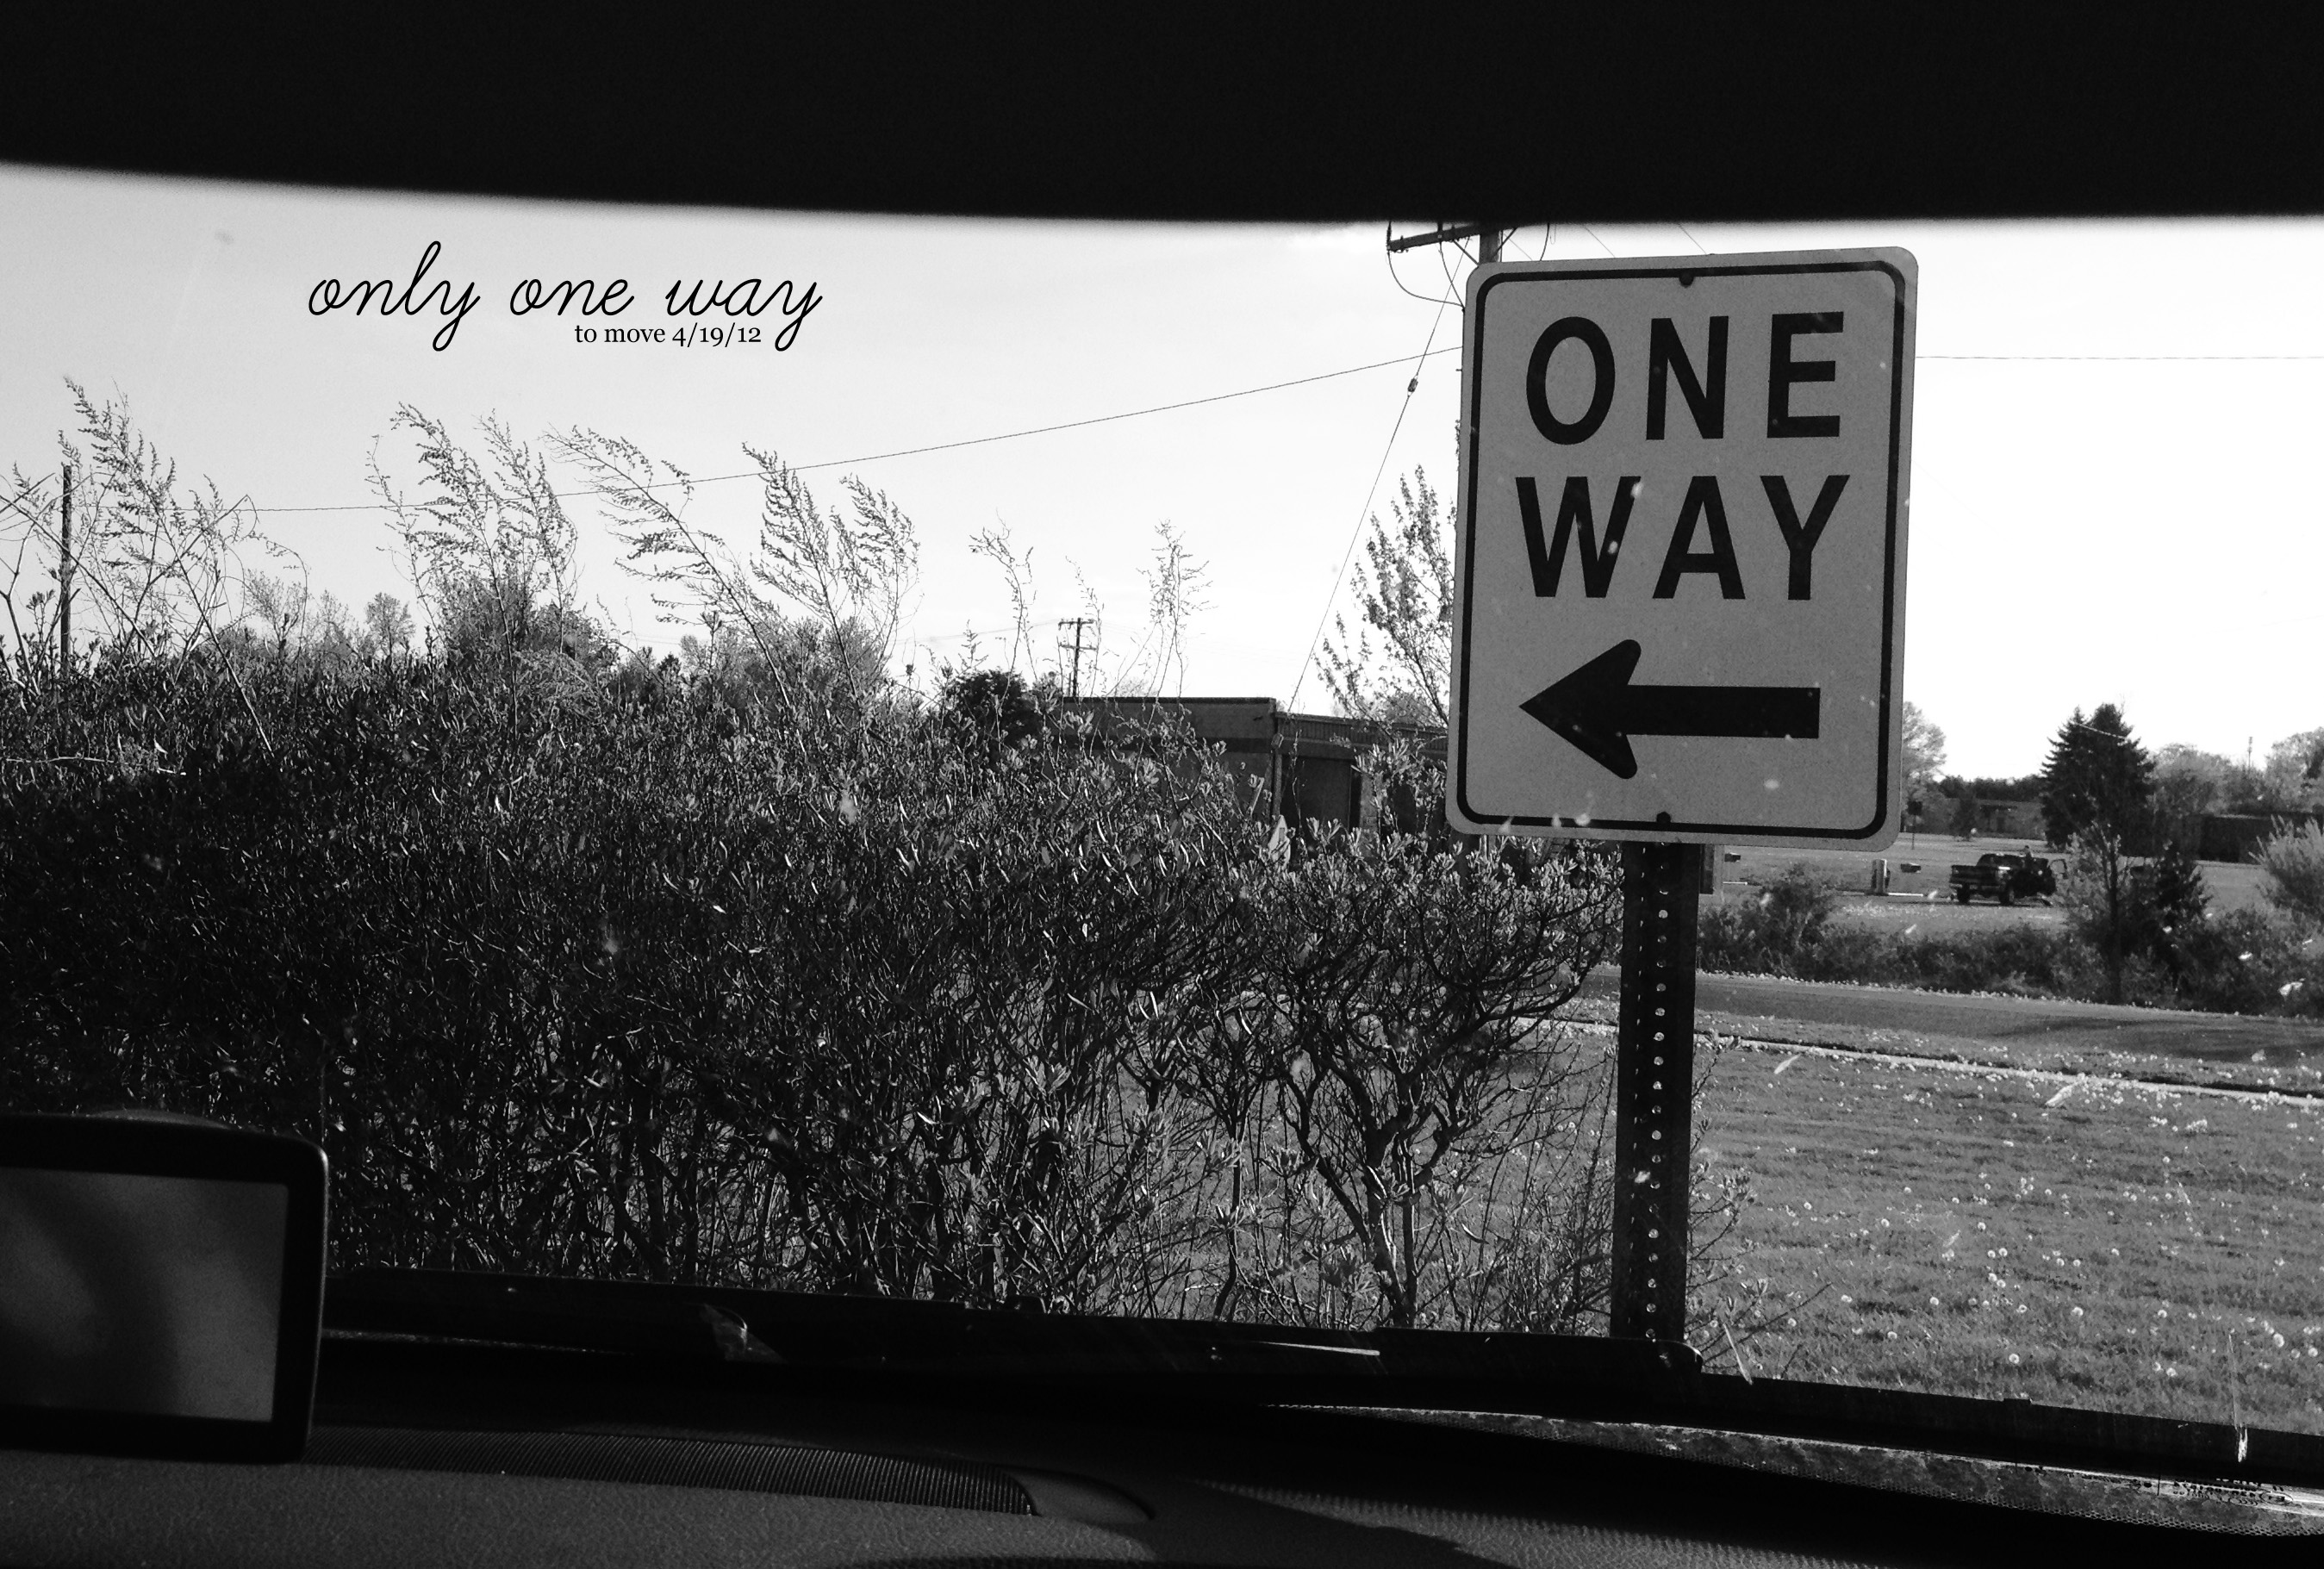 only one way apr19 :